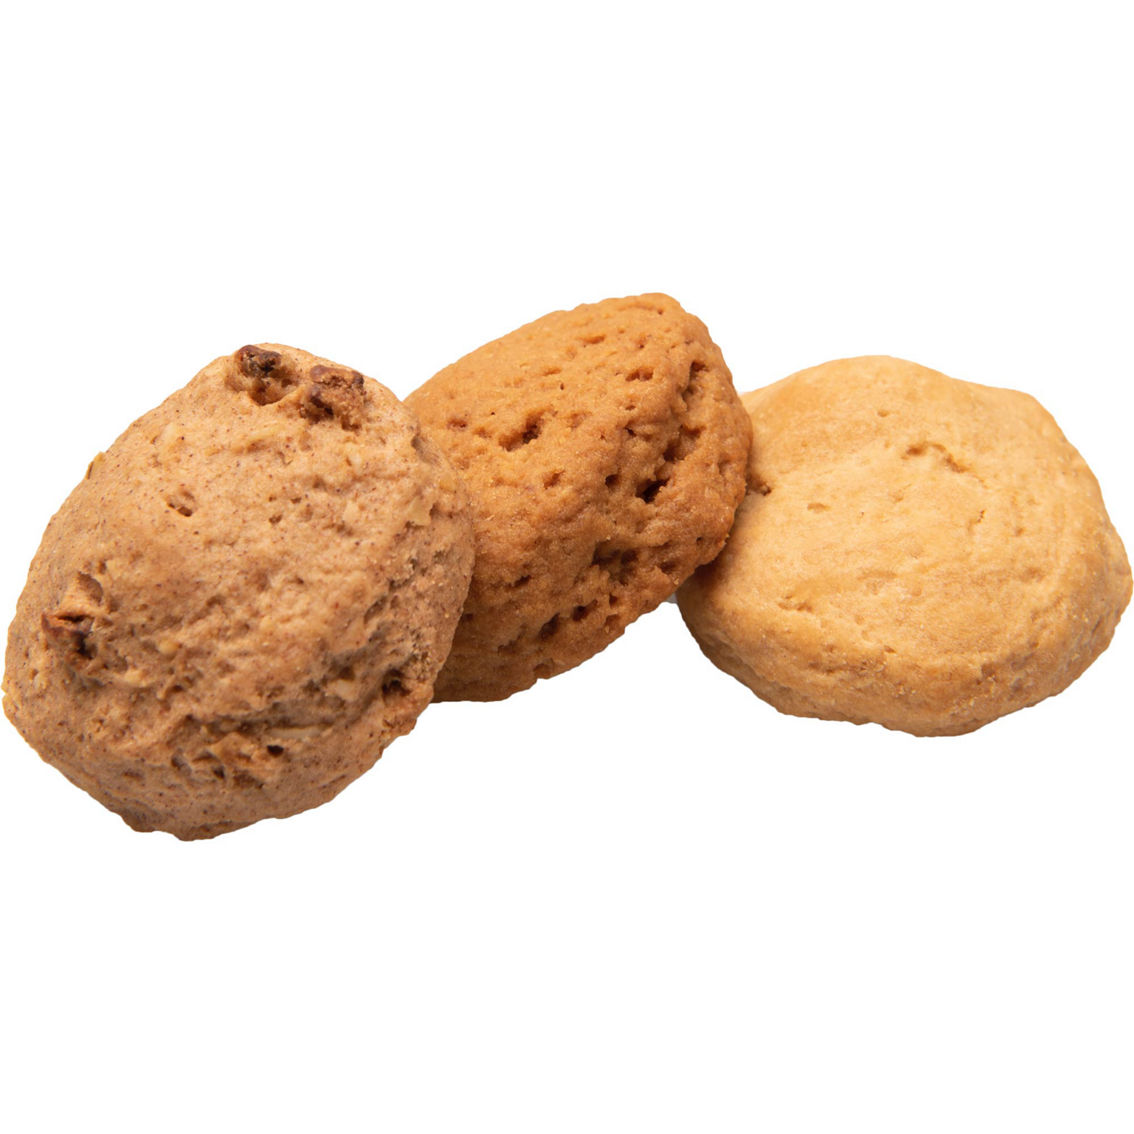 Three Dog Bakery Assort-Mutt Trio Soft Baked Cookies - Image 3 of 3